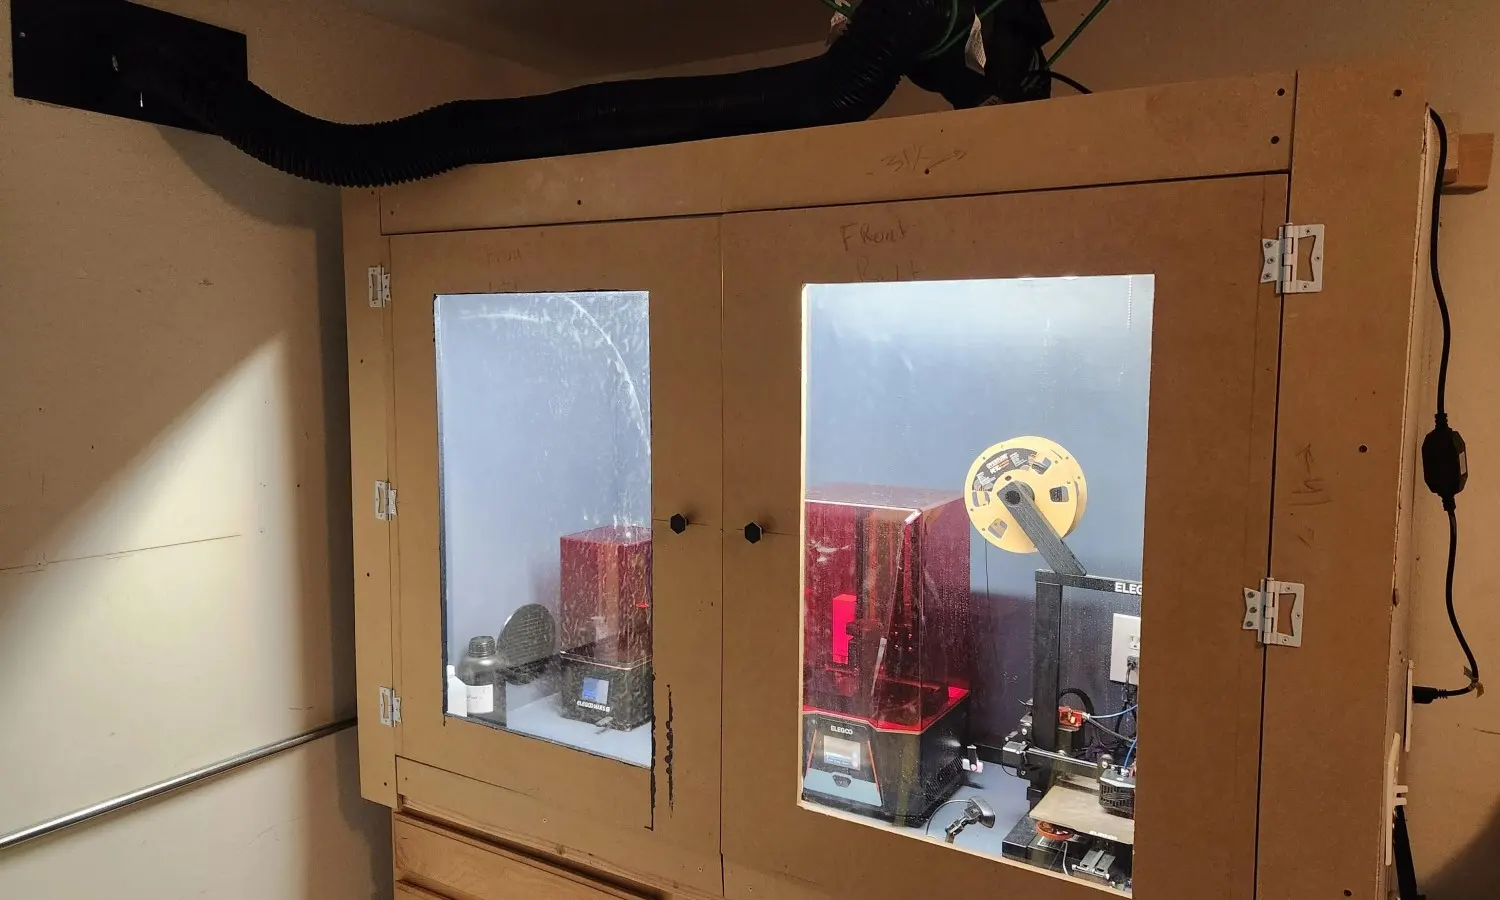 Resin printers in an enclosure that is vented outdoors via a fan and duct